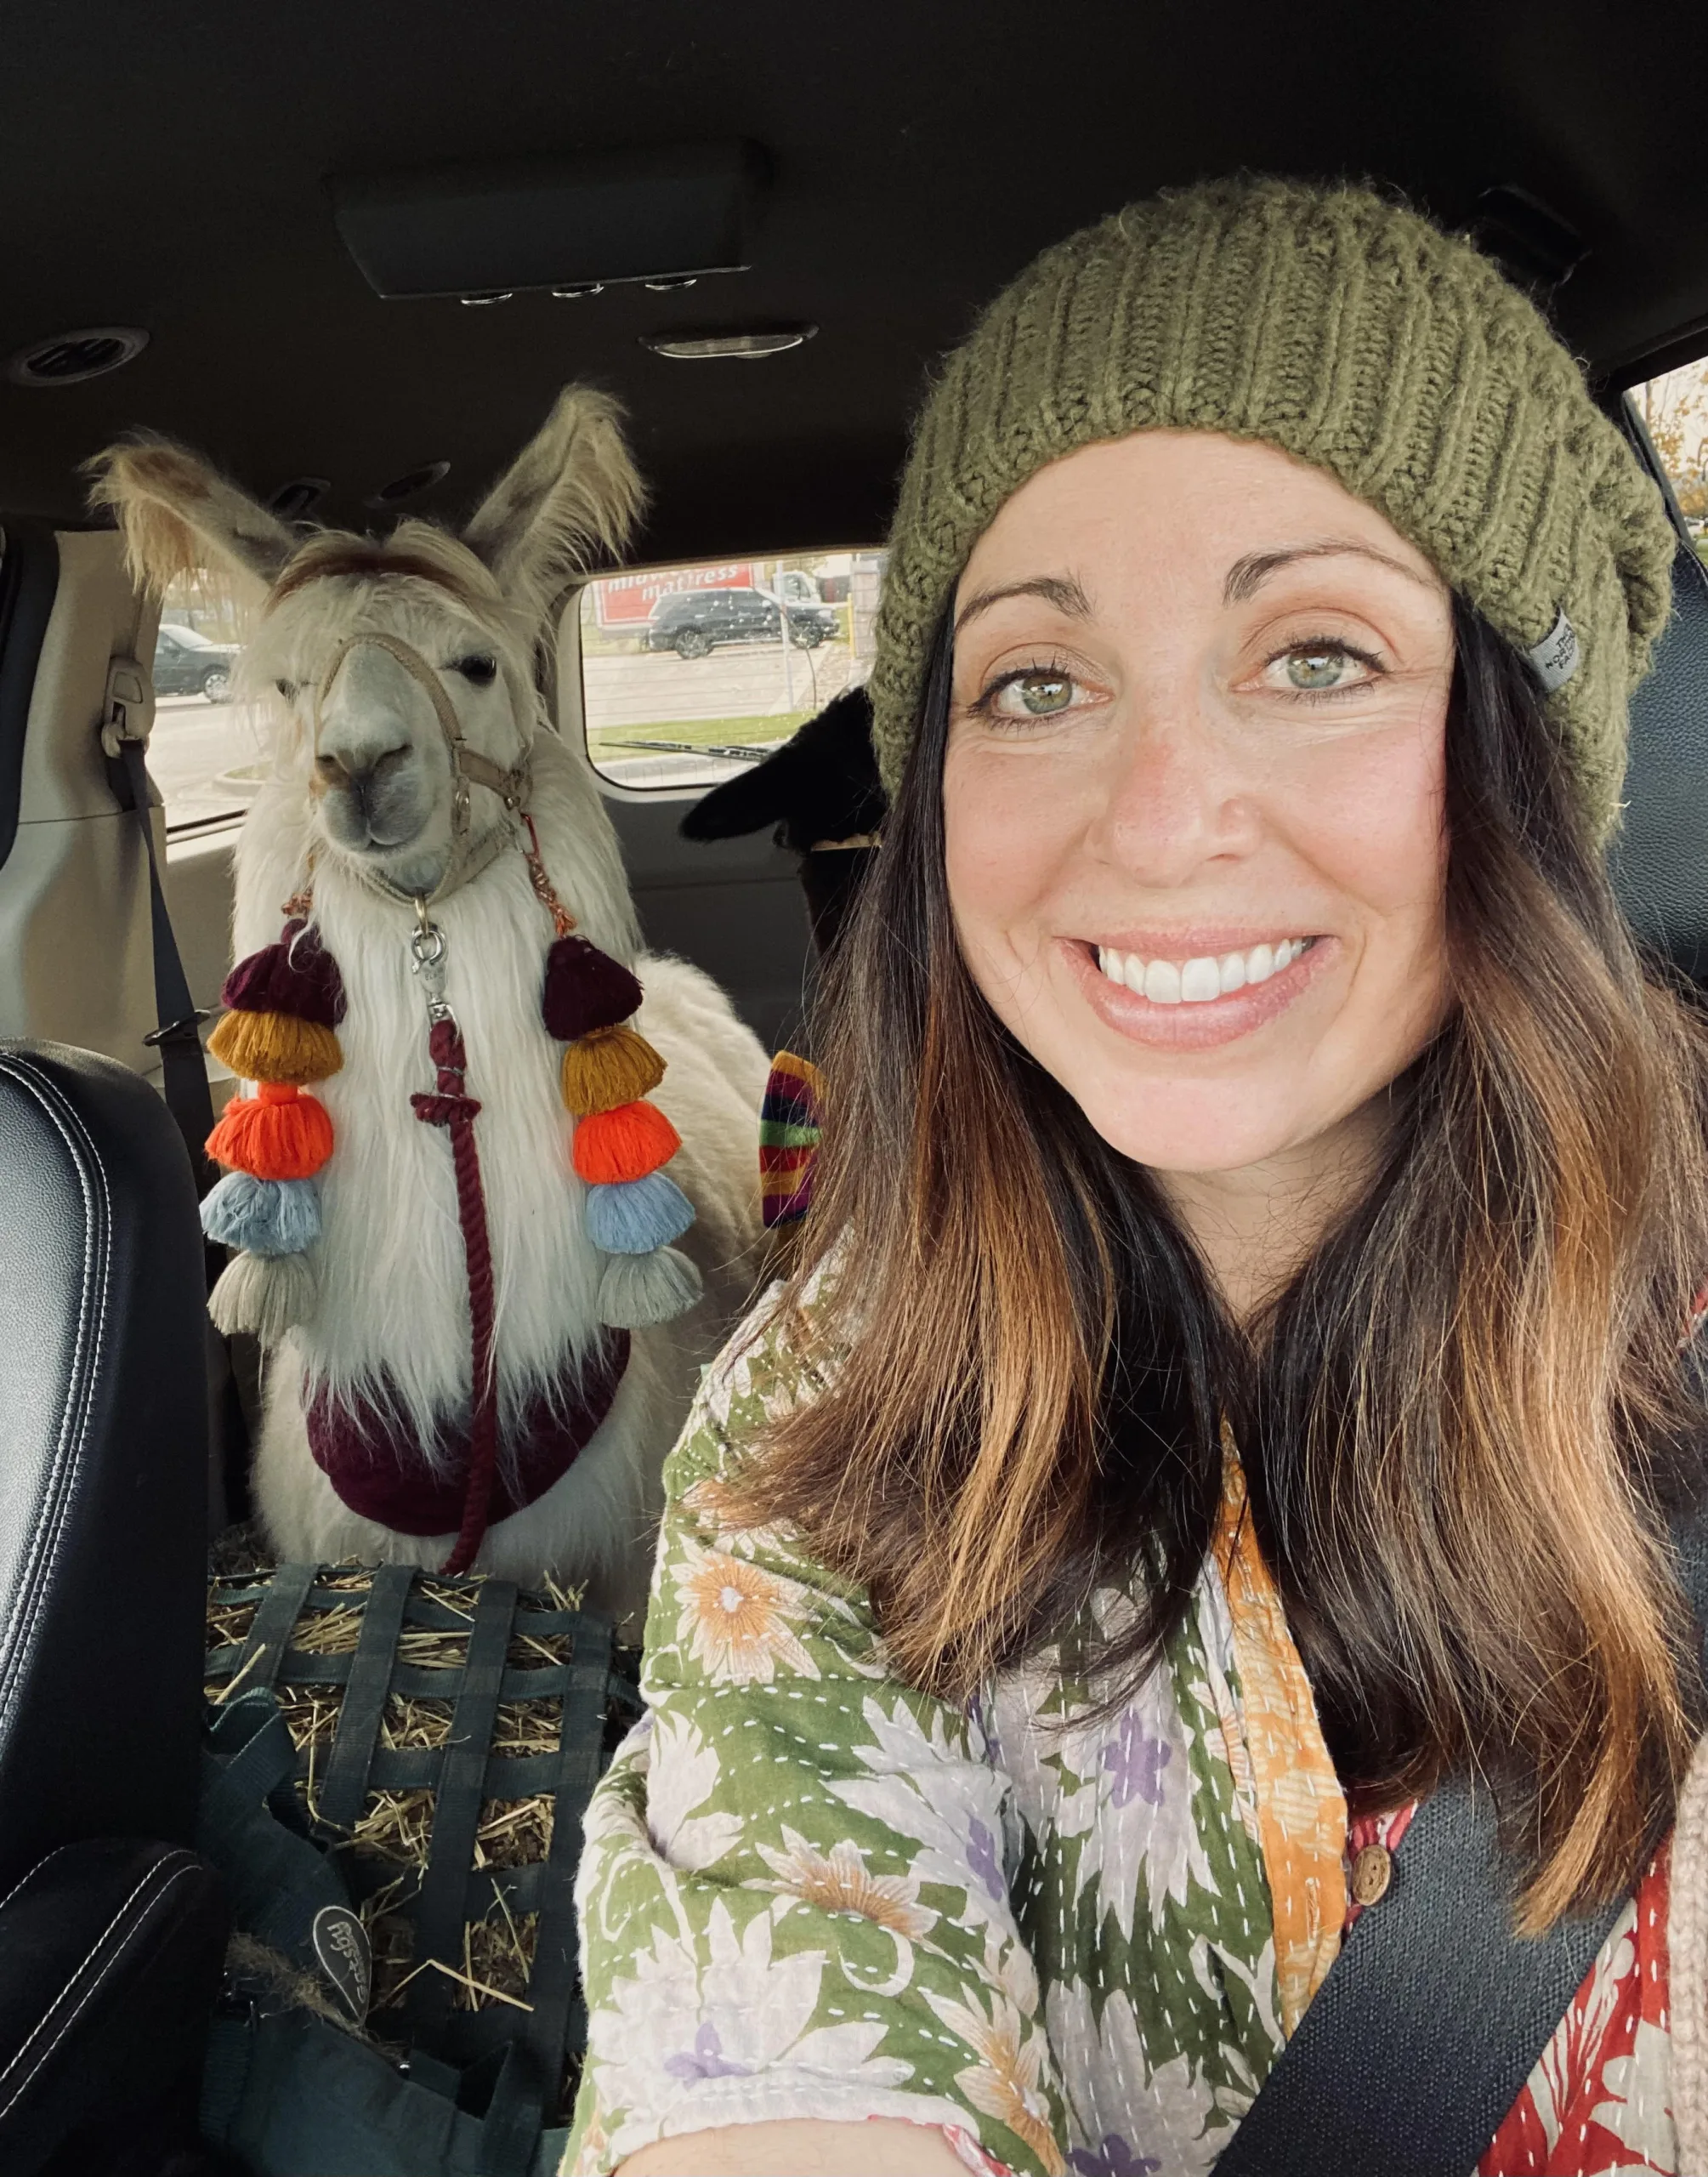 Kahle smiles with a green beanie on while a llama is shown in the back with two tassel earrings.